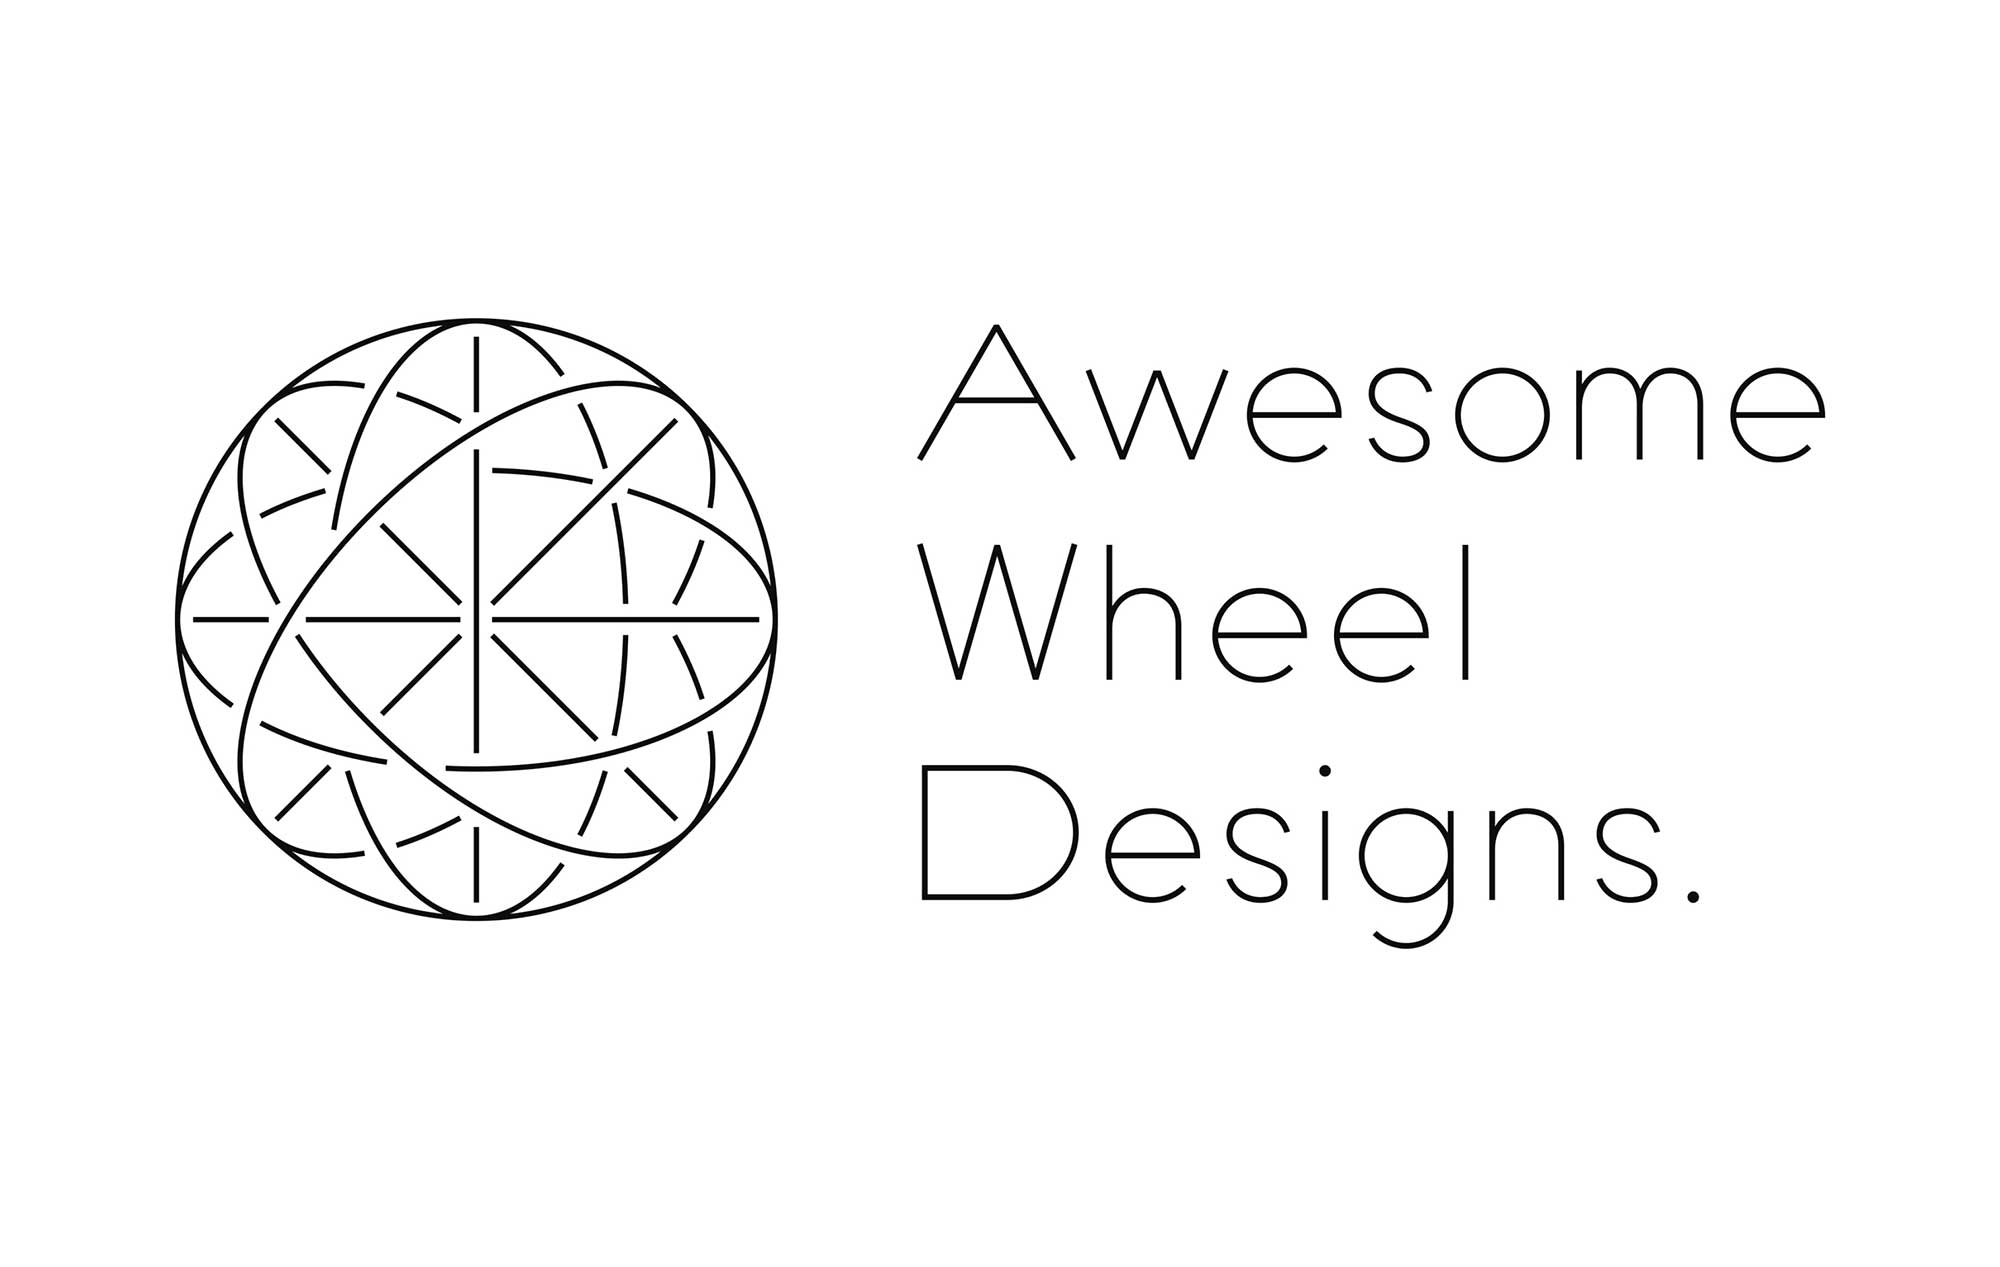 Awesome Wheel Designs.